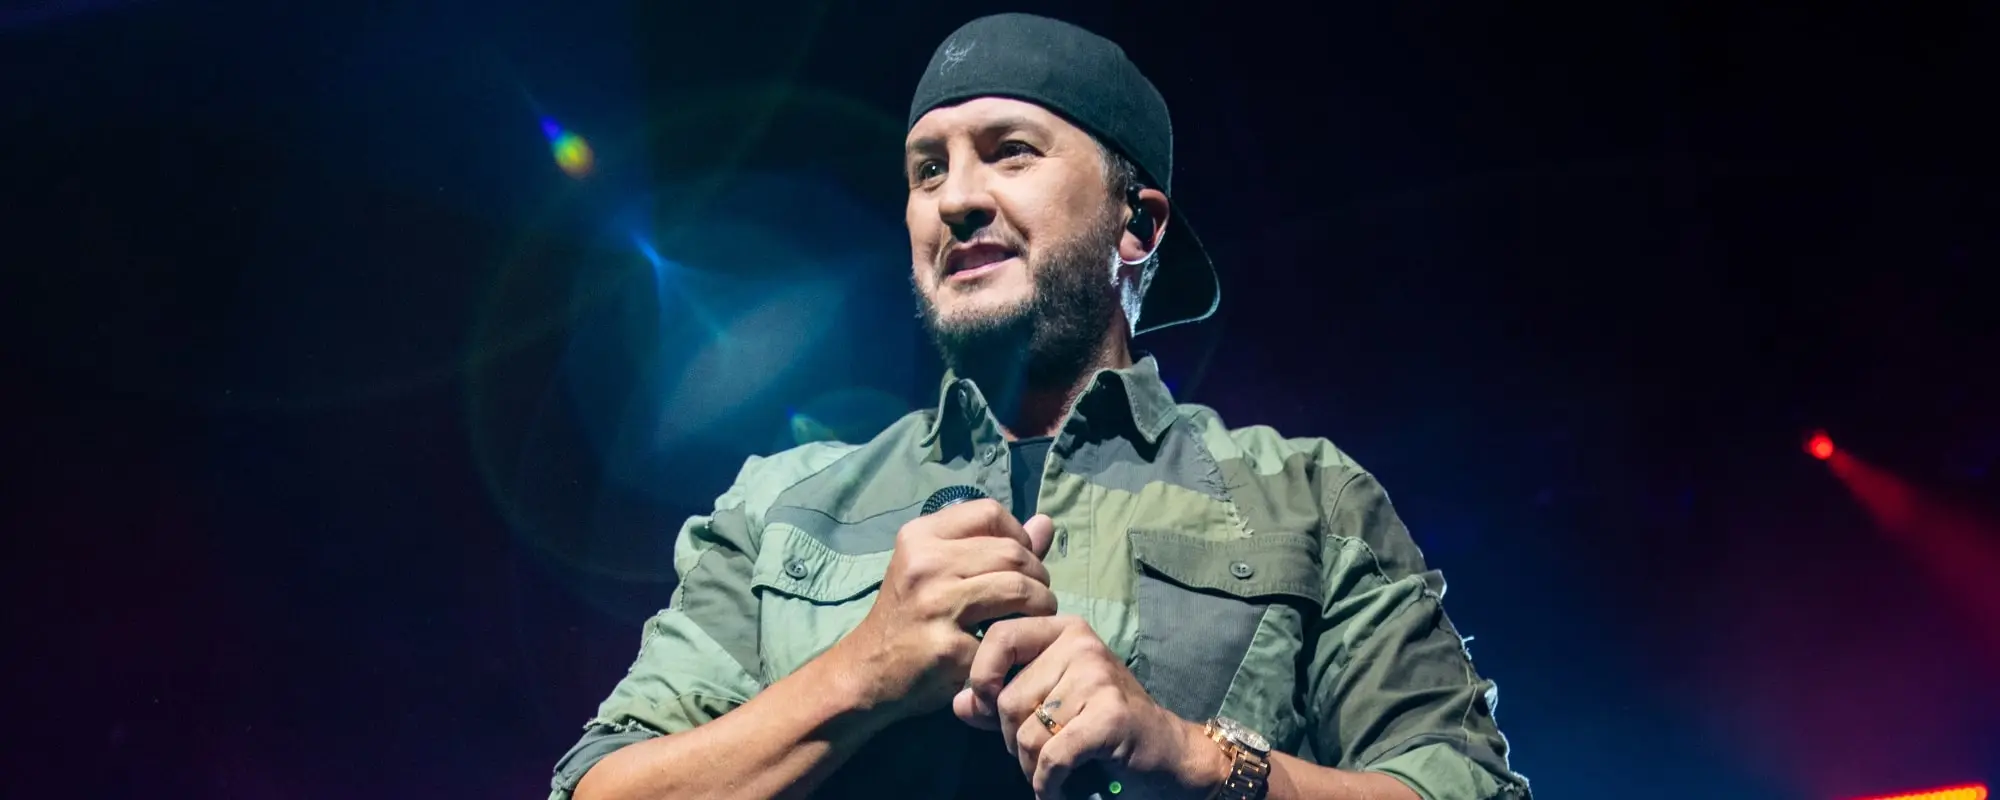 Luke Bryan Opens up About His Friendship With Katy Perry and Her Departure From ‘American Idol’